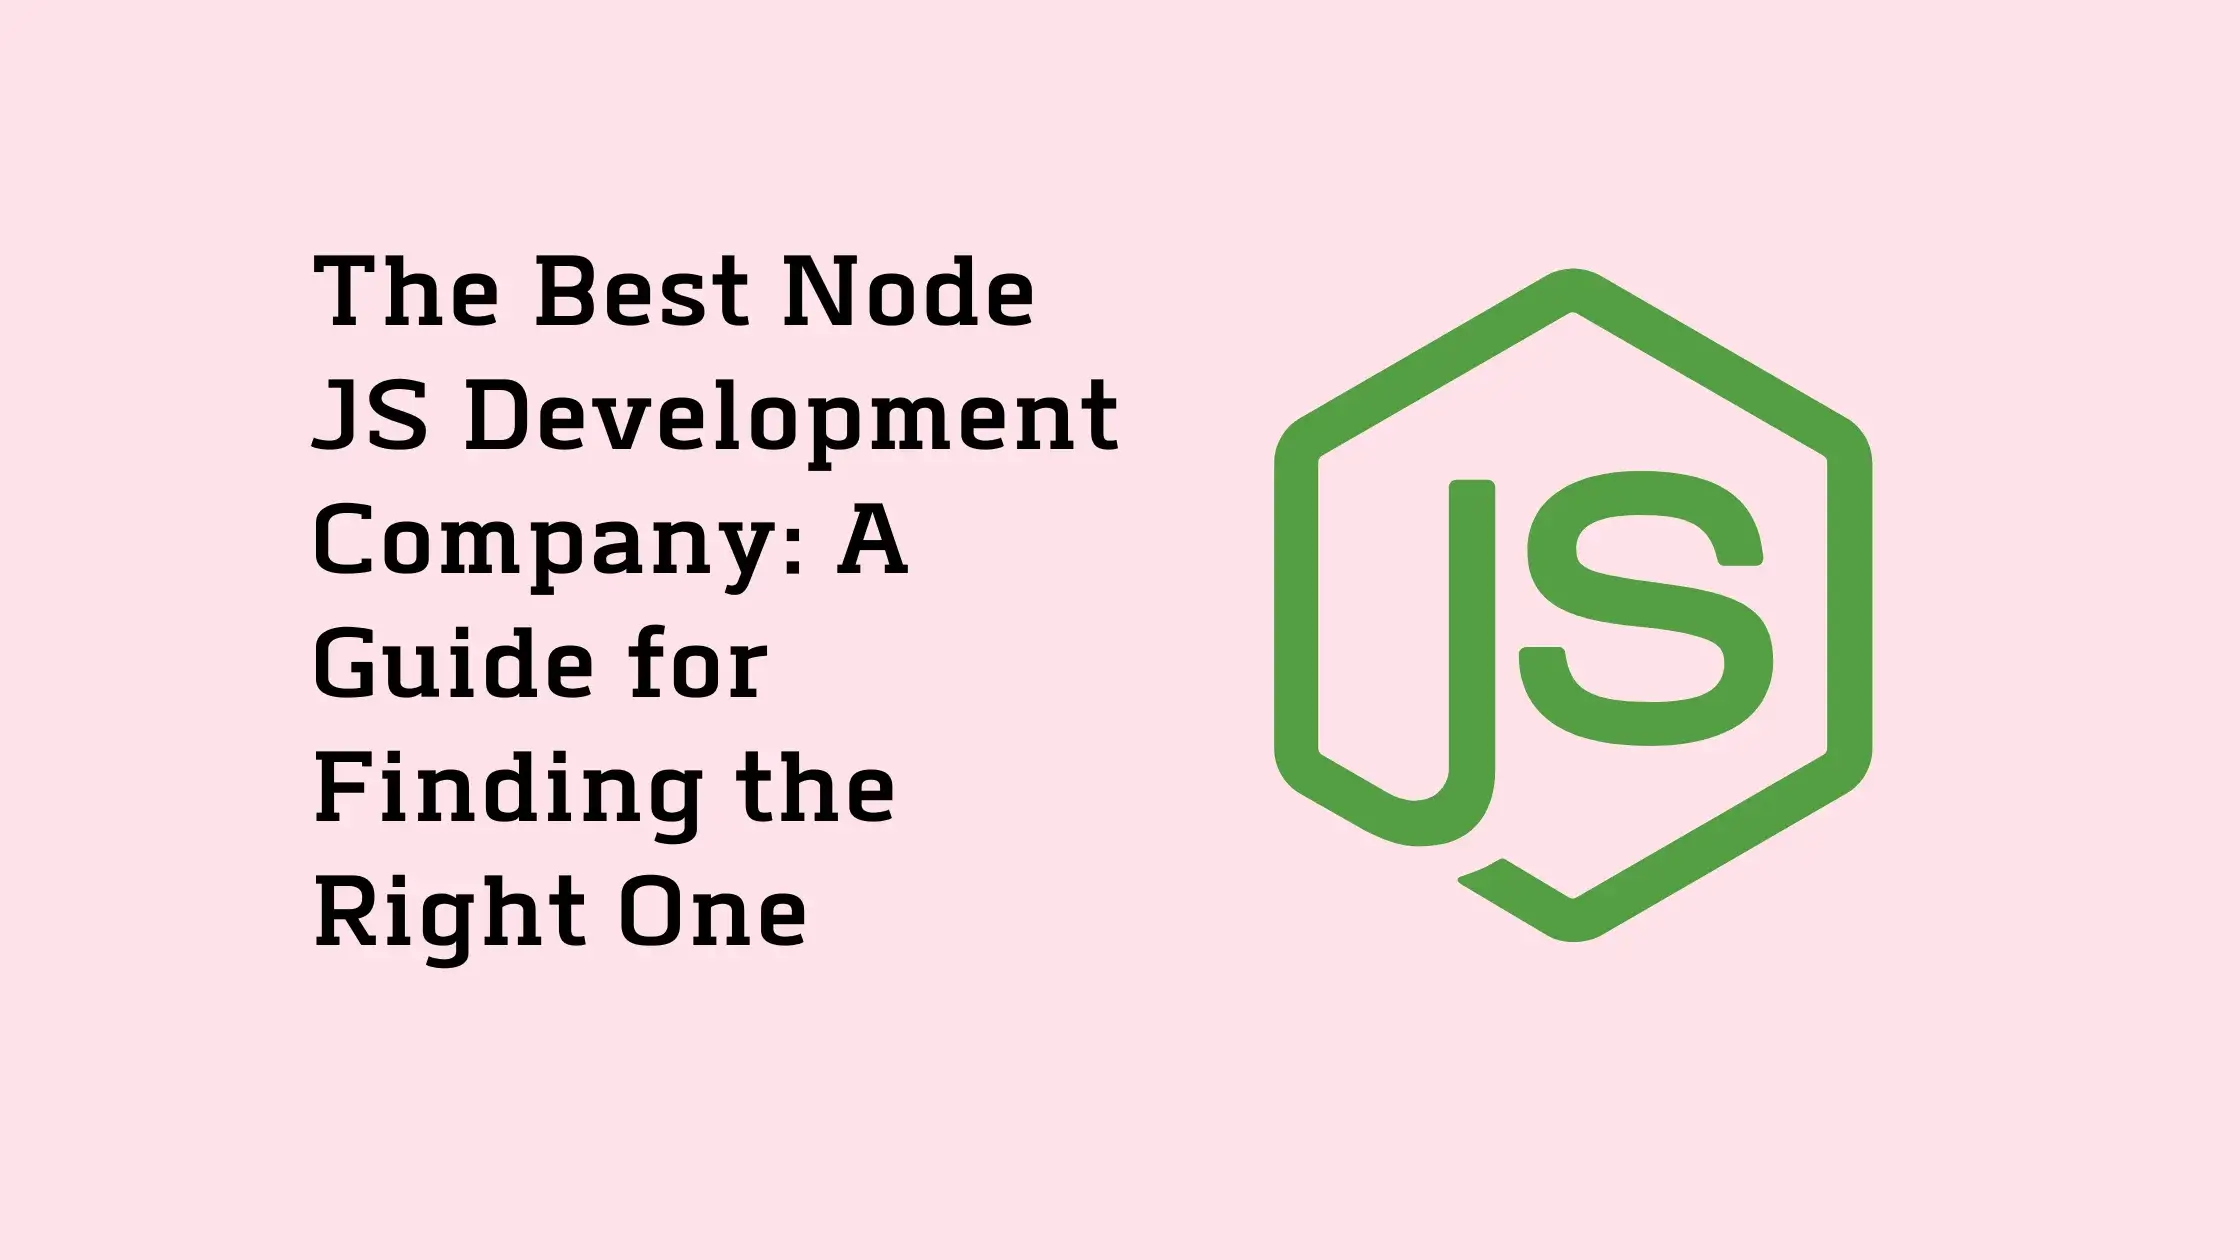 The-Best-Node-JS-Development-Company-A-Guide-for-Finding-the-Right-One